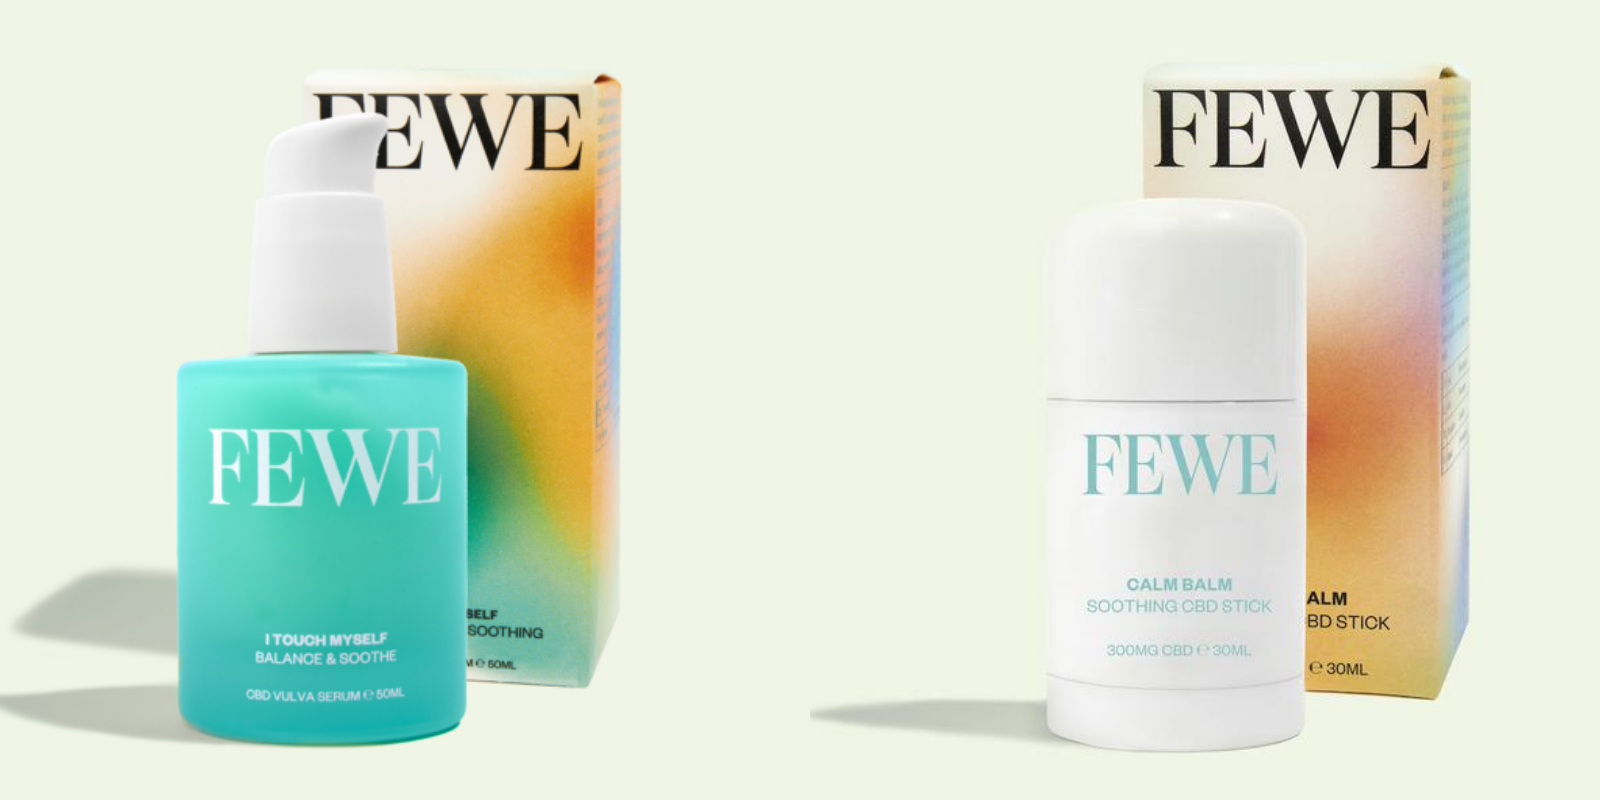 SWB launched FEWE, a self-care brand drawing on the natural benefits of cannabidiol (CBD) 